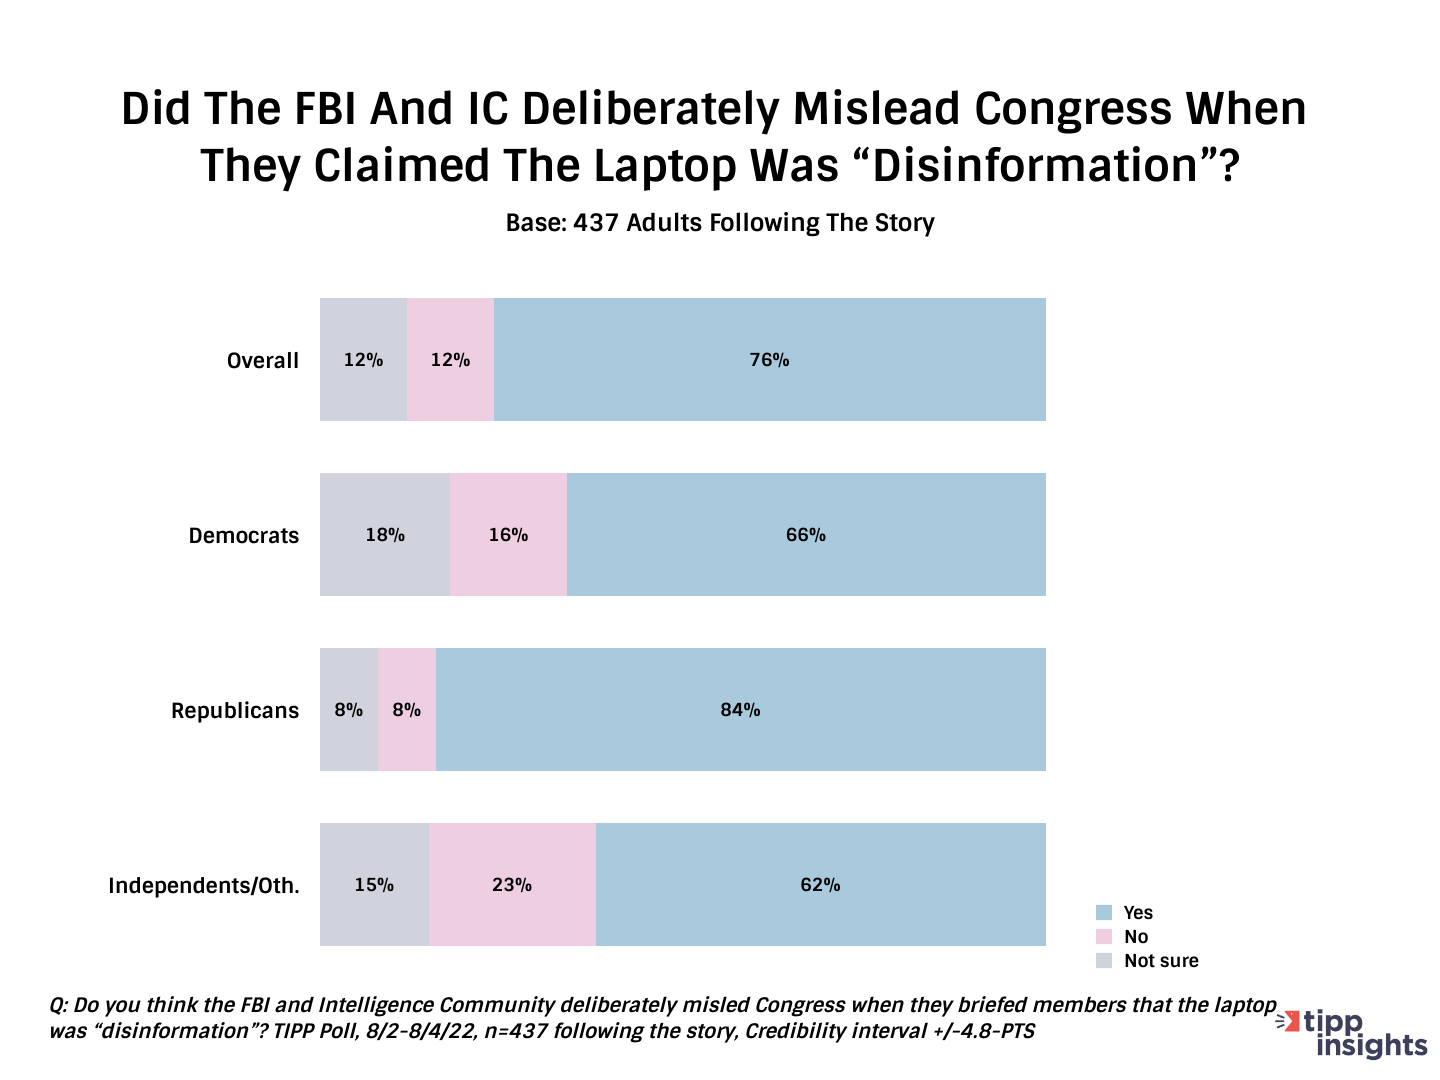 TIPP Poll results: Did the FBI and IC deliberately mislead the public stating the Hunter Biden laptop was disinformation, party line